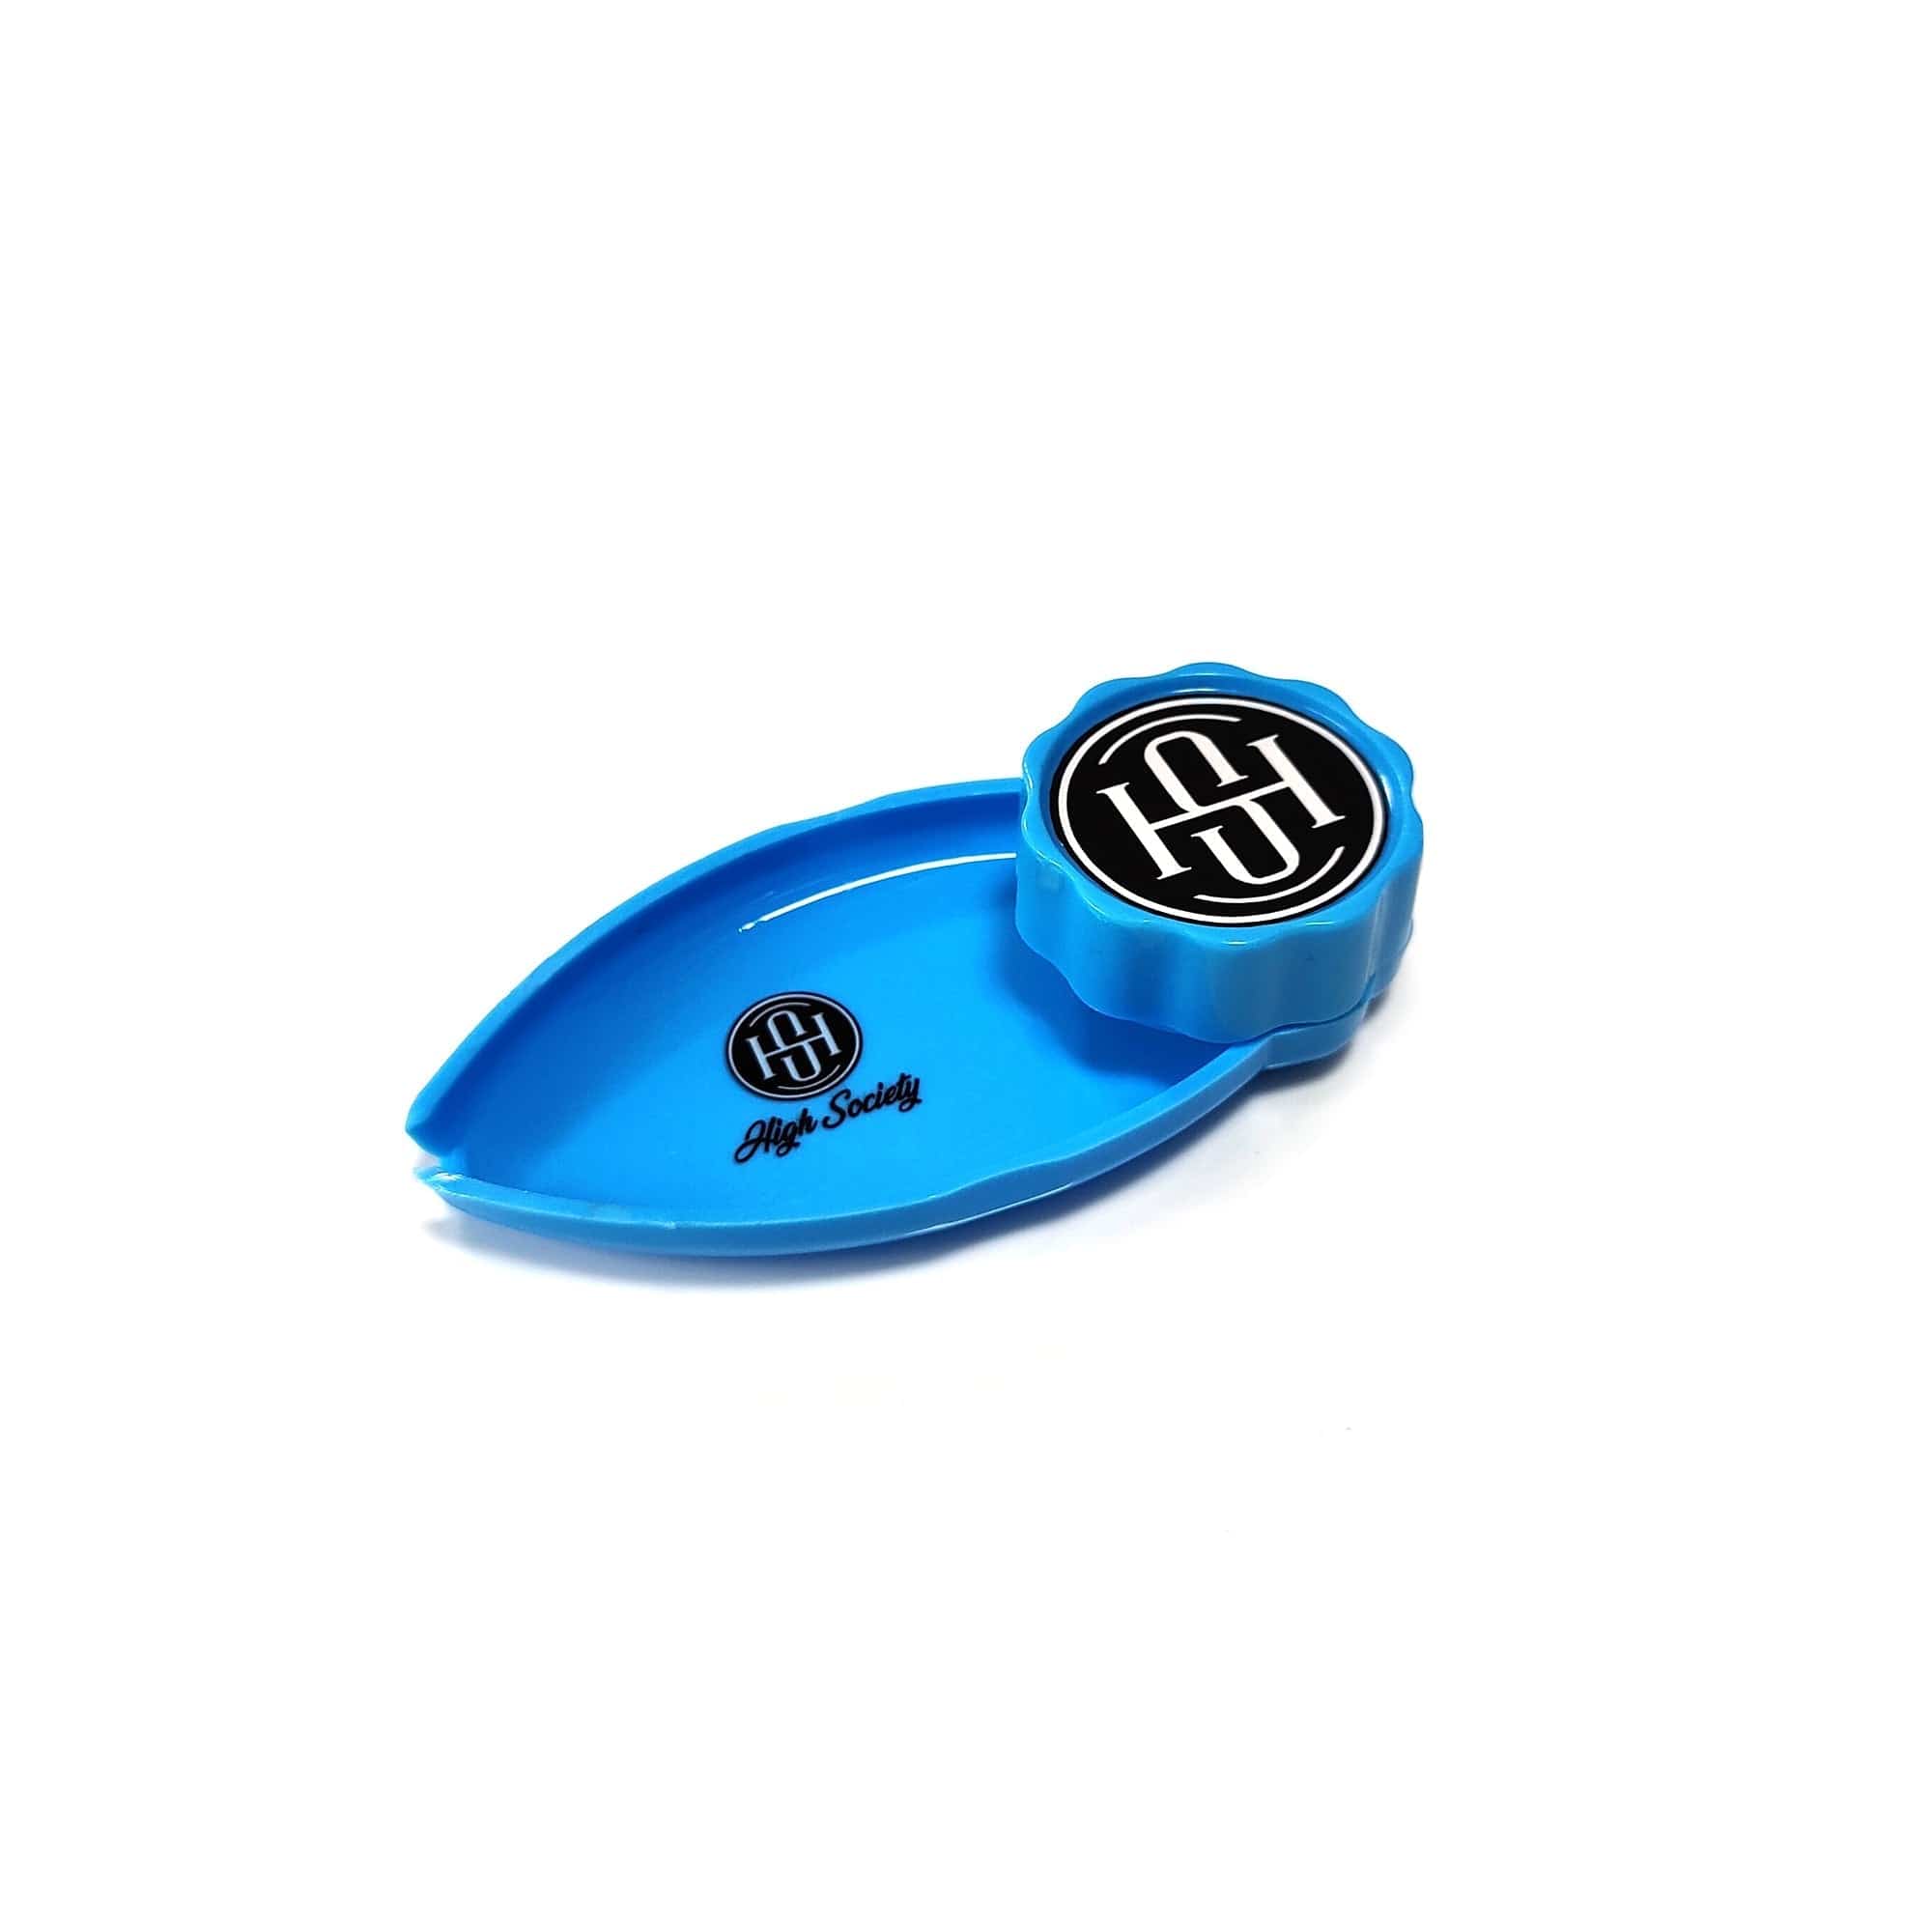 High Society High Society | Mini Rolling Tray Grinder Combo - Neon Blue